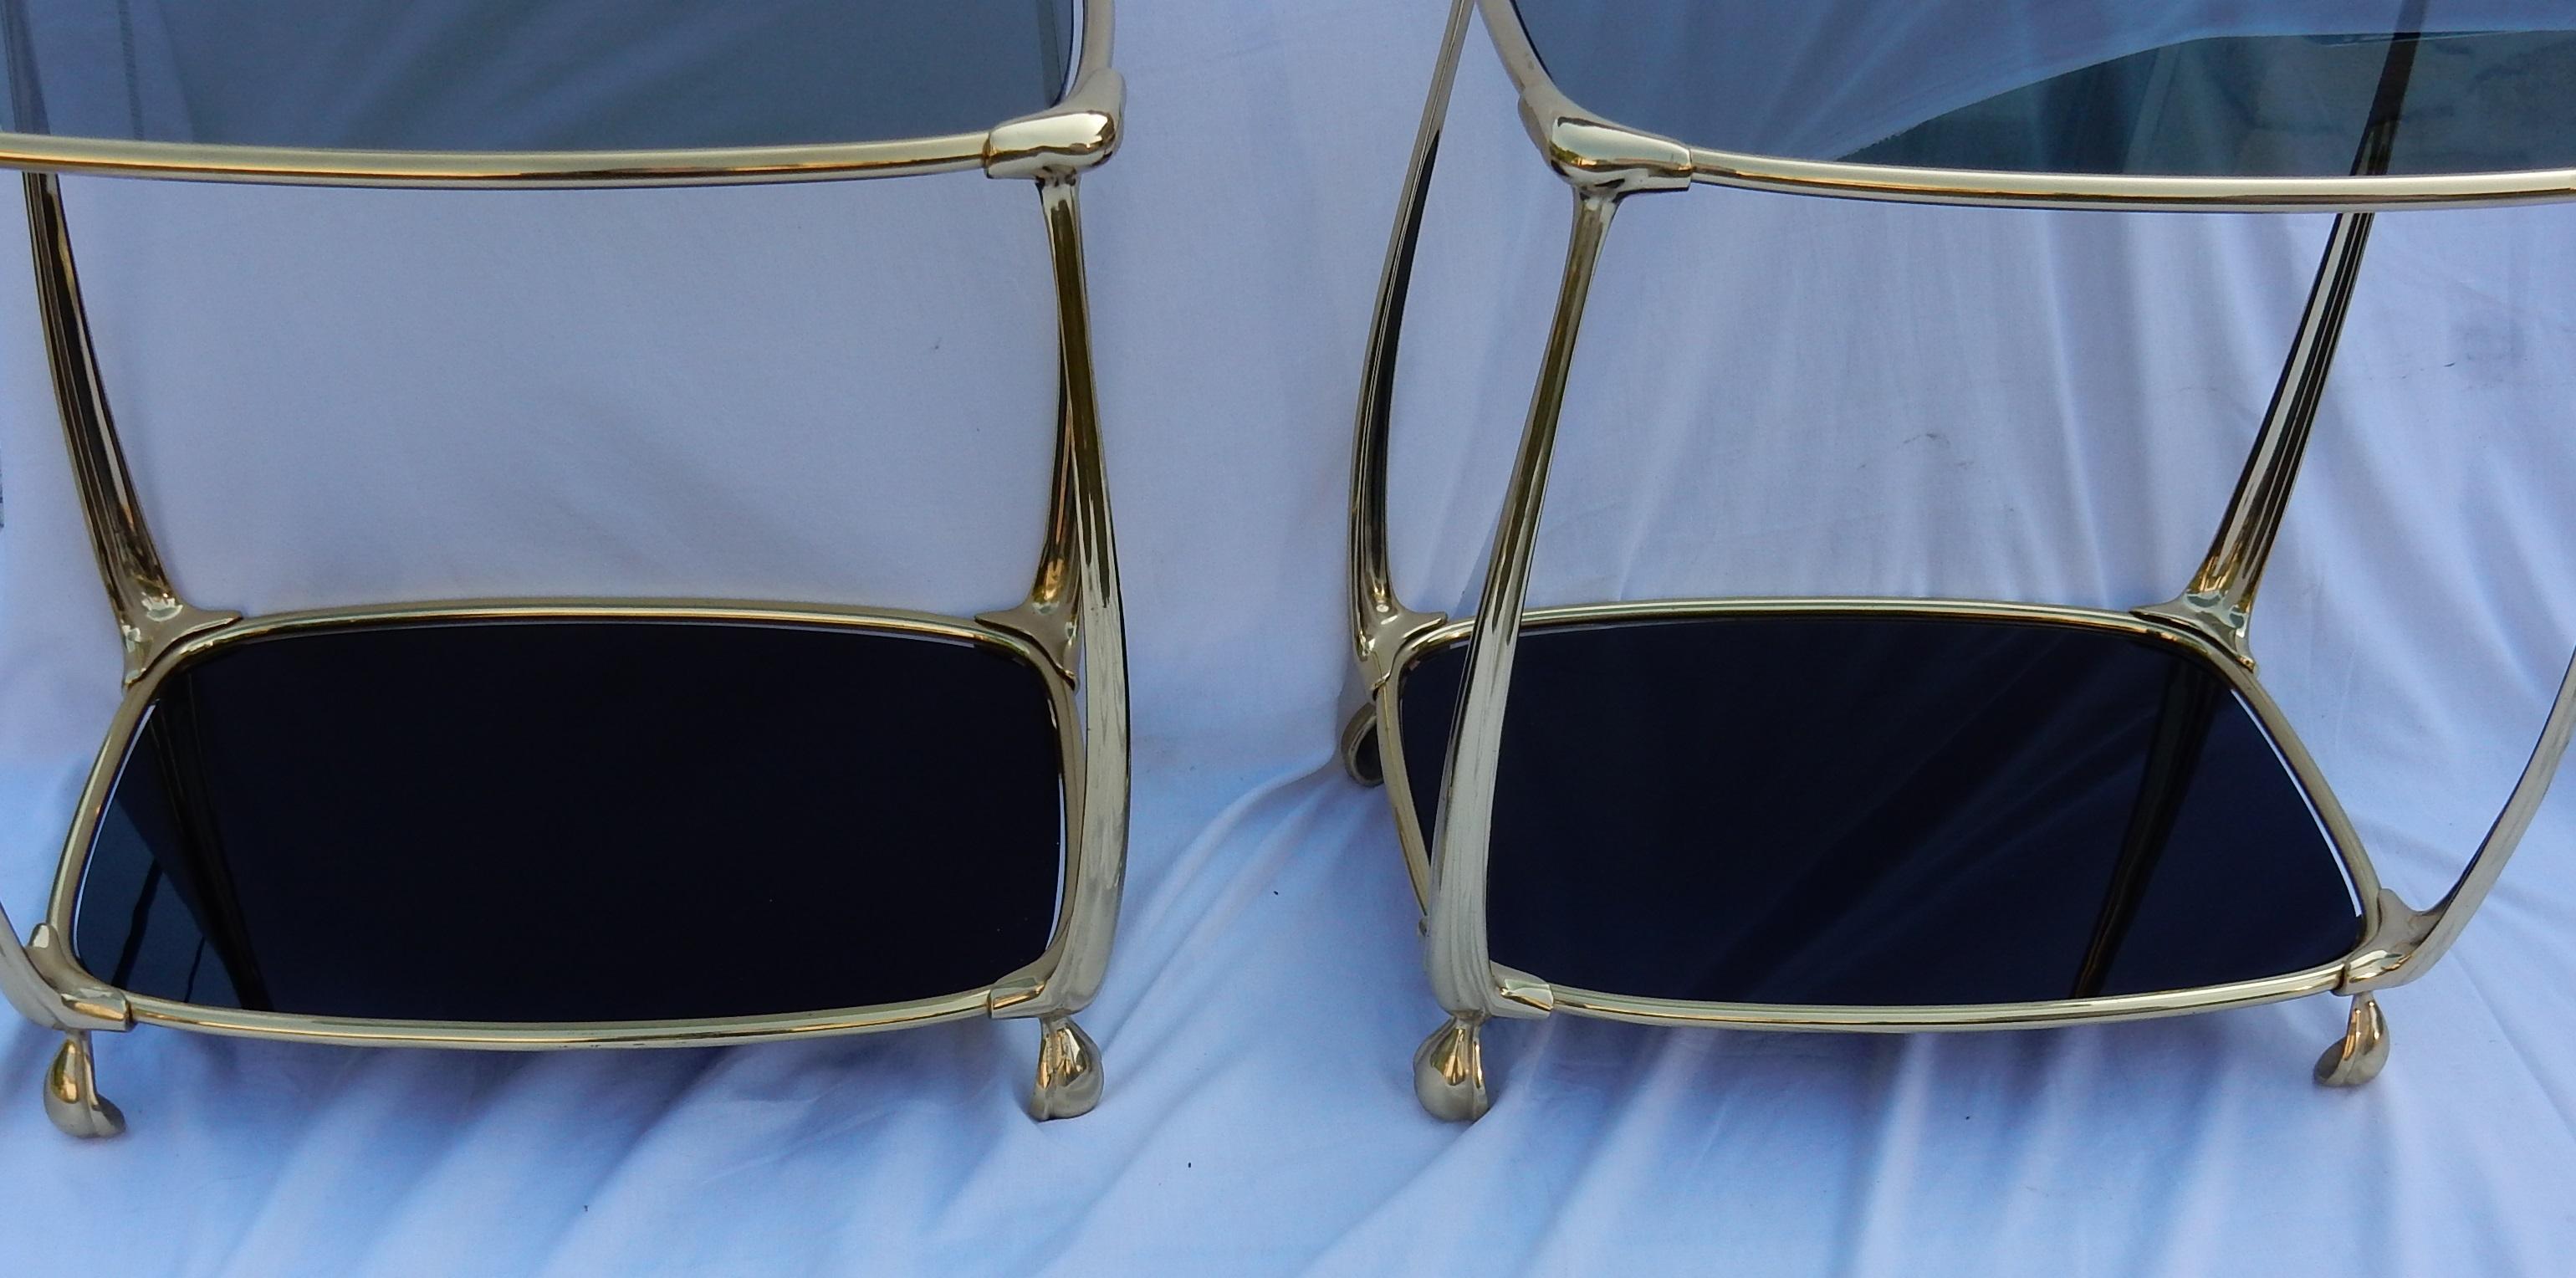 Pair of tables in Art Nouveau style in gilded bronze, trays in smoked glass and black opaline, flared base, circa 1970-1980, everything is screwed and reinforcements on the angles. Good condition.

      